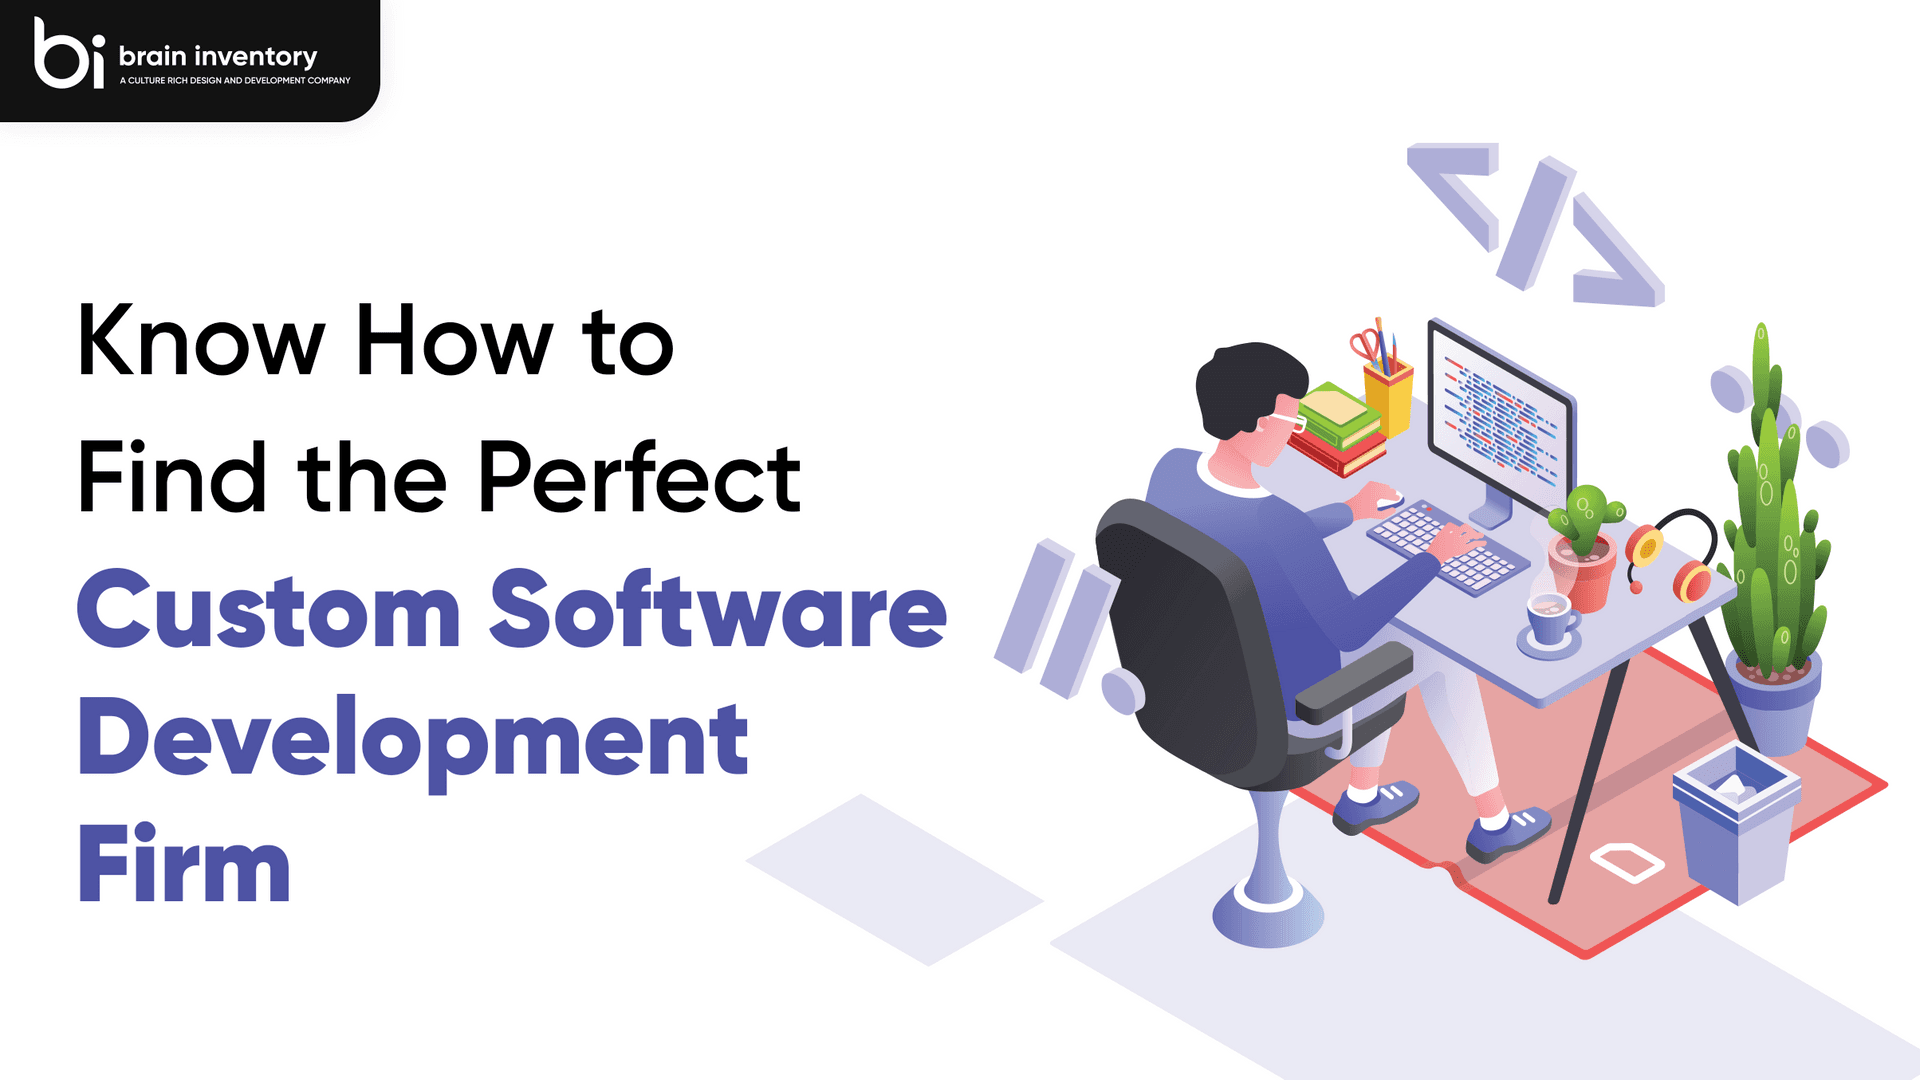 Know How to Find the Perfect Custom Software Development Firm